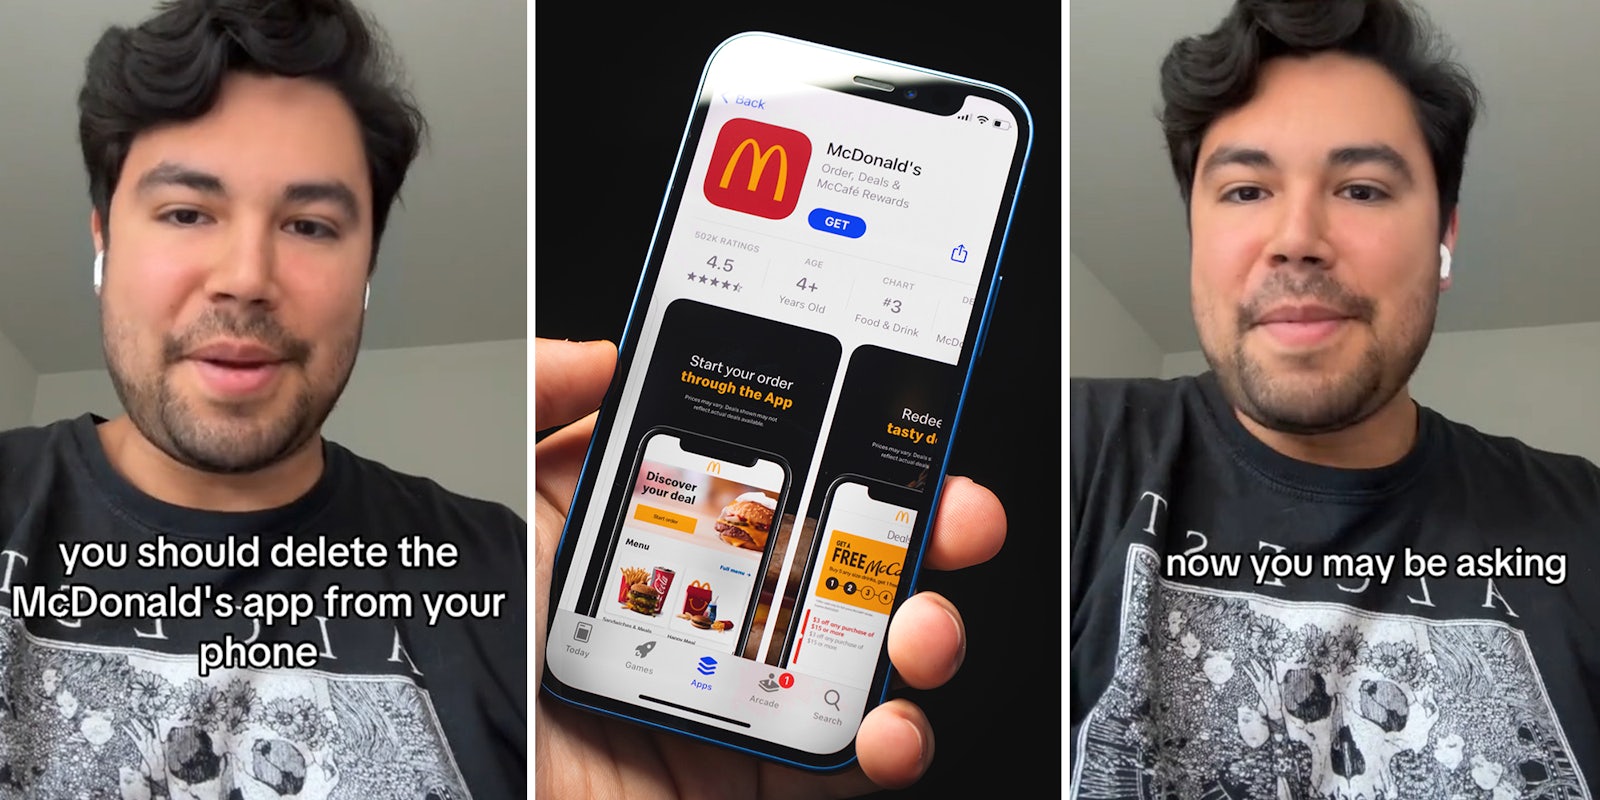 McDonald’s customer warns of ‘personalized pricing’ on the app